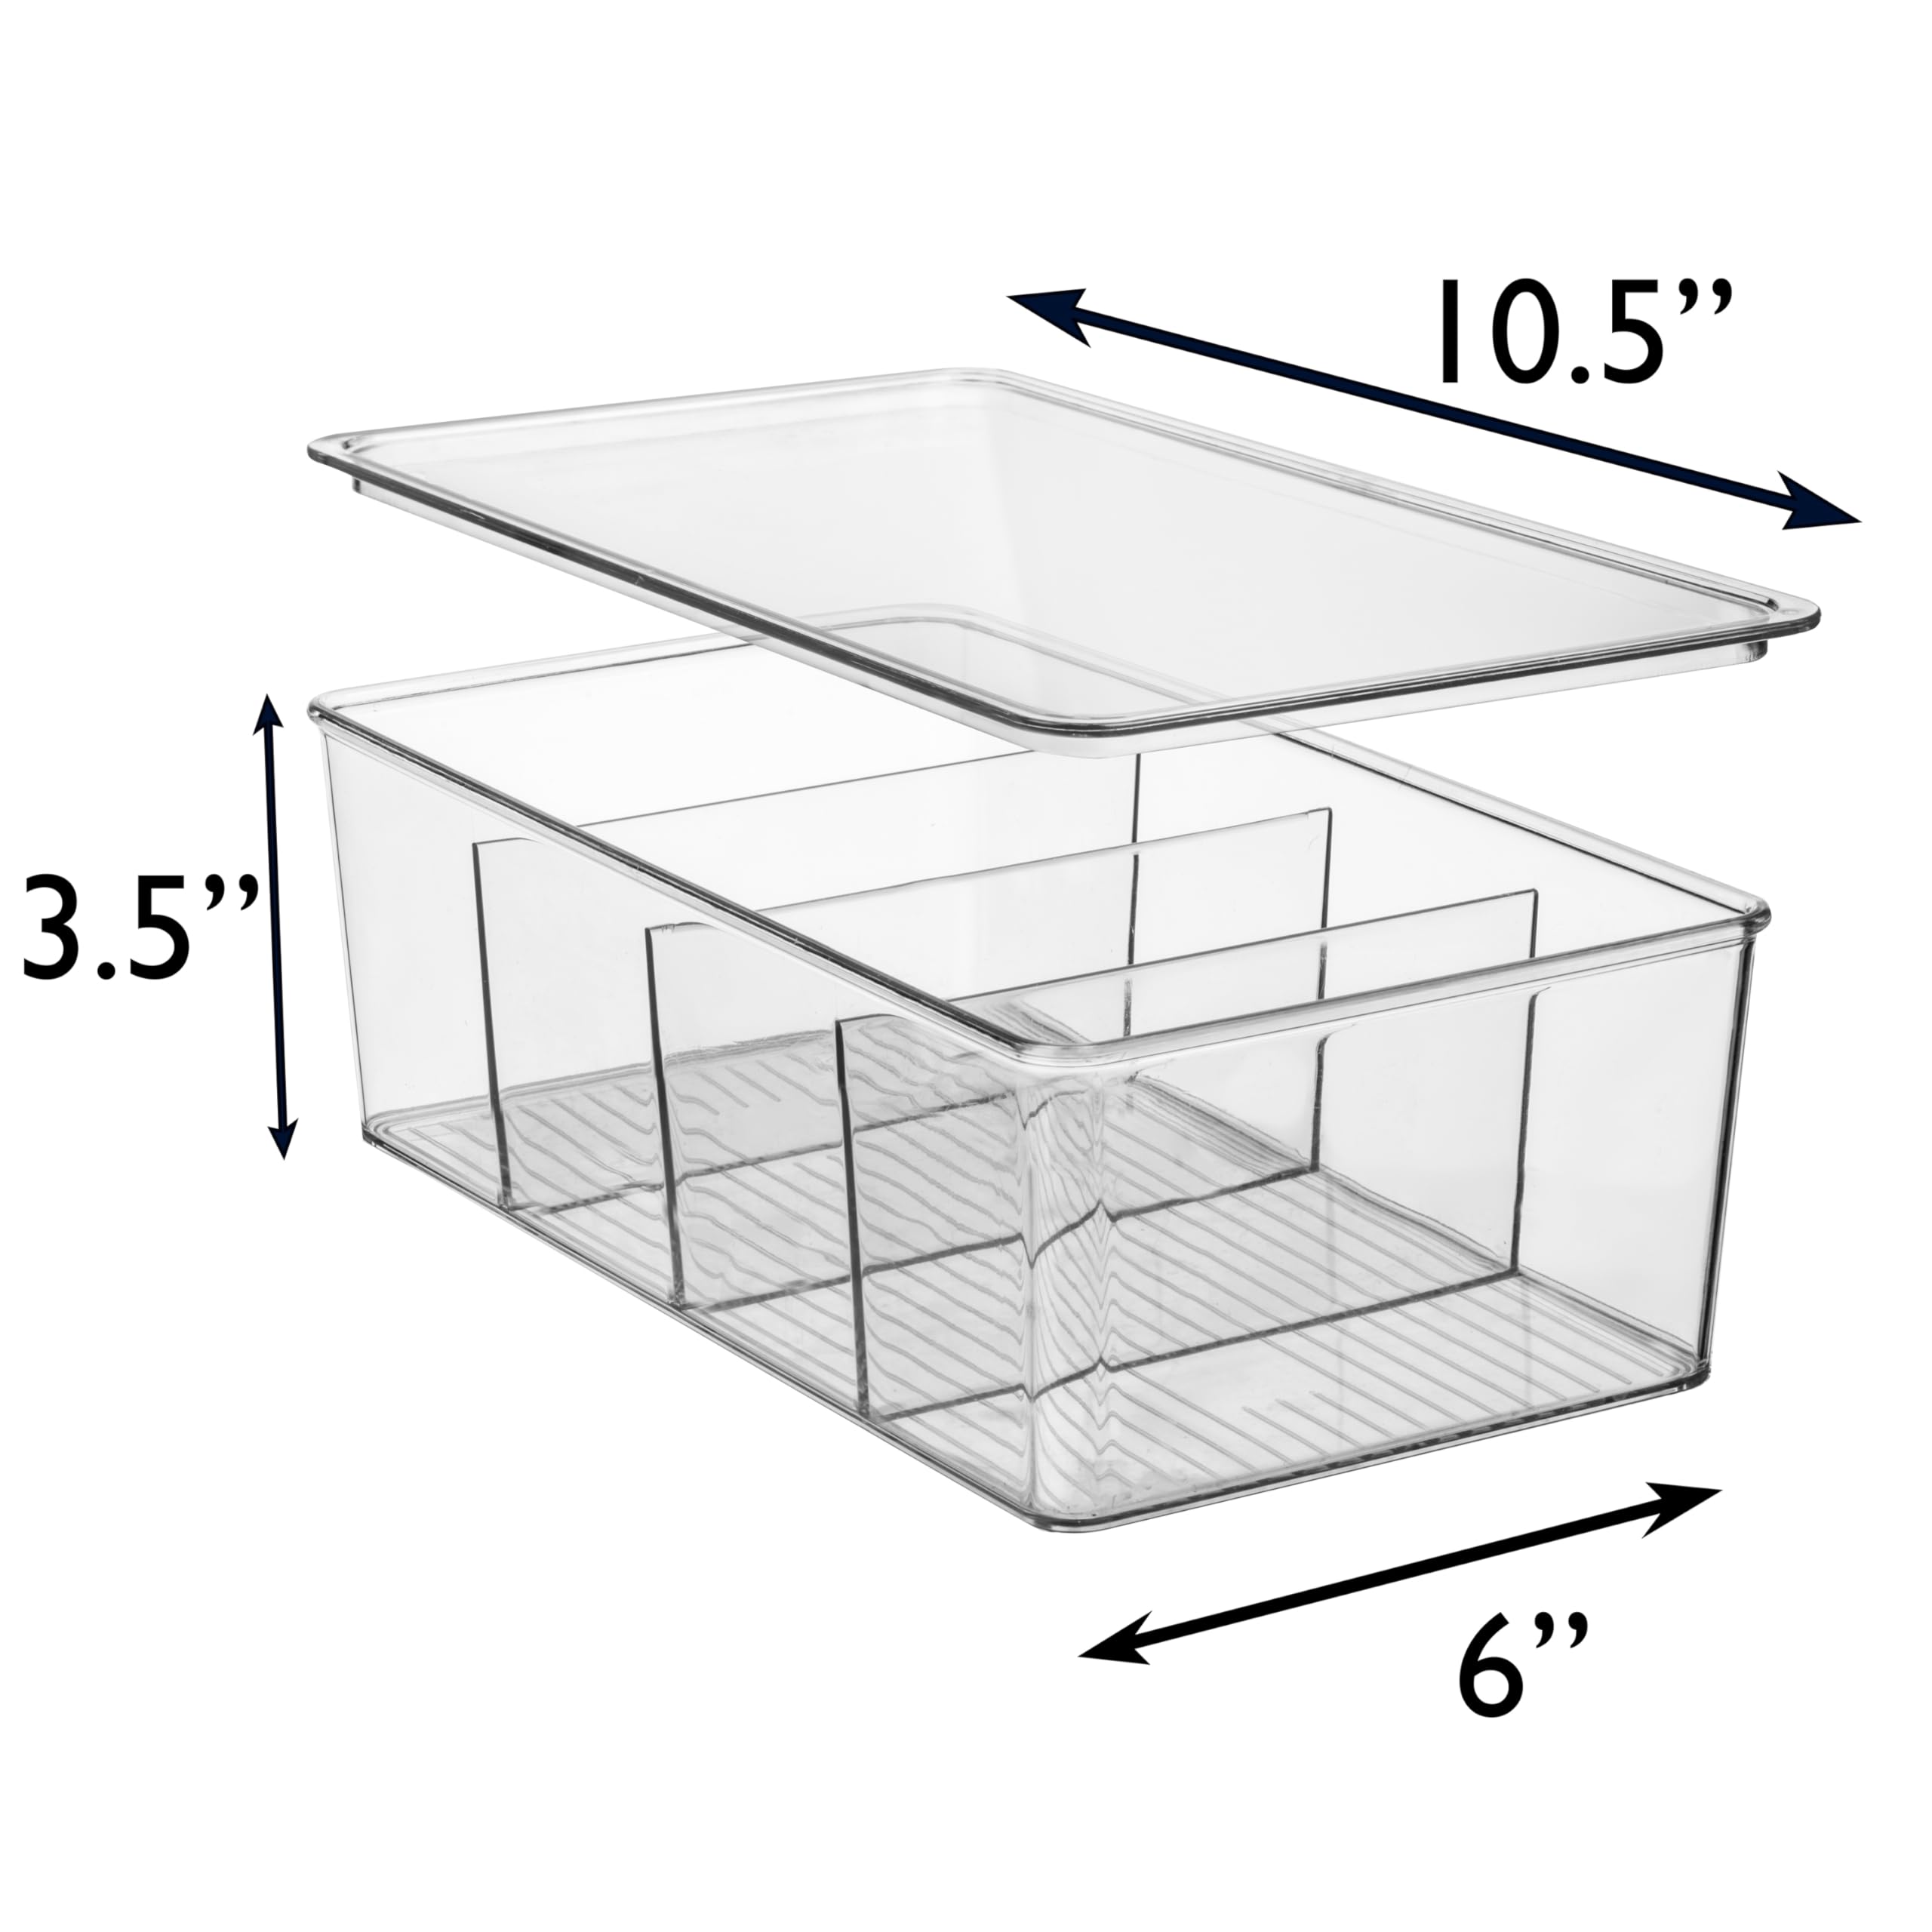 ClearSpace Plastic Pantry Organization and Storage Bins with Dividers & Lids � Perfect Kitchen Organization or Kitchen Storage � Fridge Organizer, Refrigerator Bins, Cabinet Organizers, 2 Pack  - Very Good